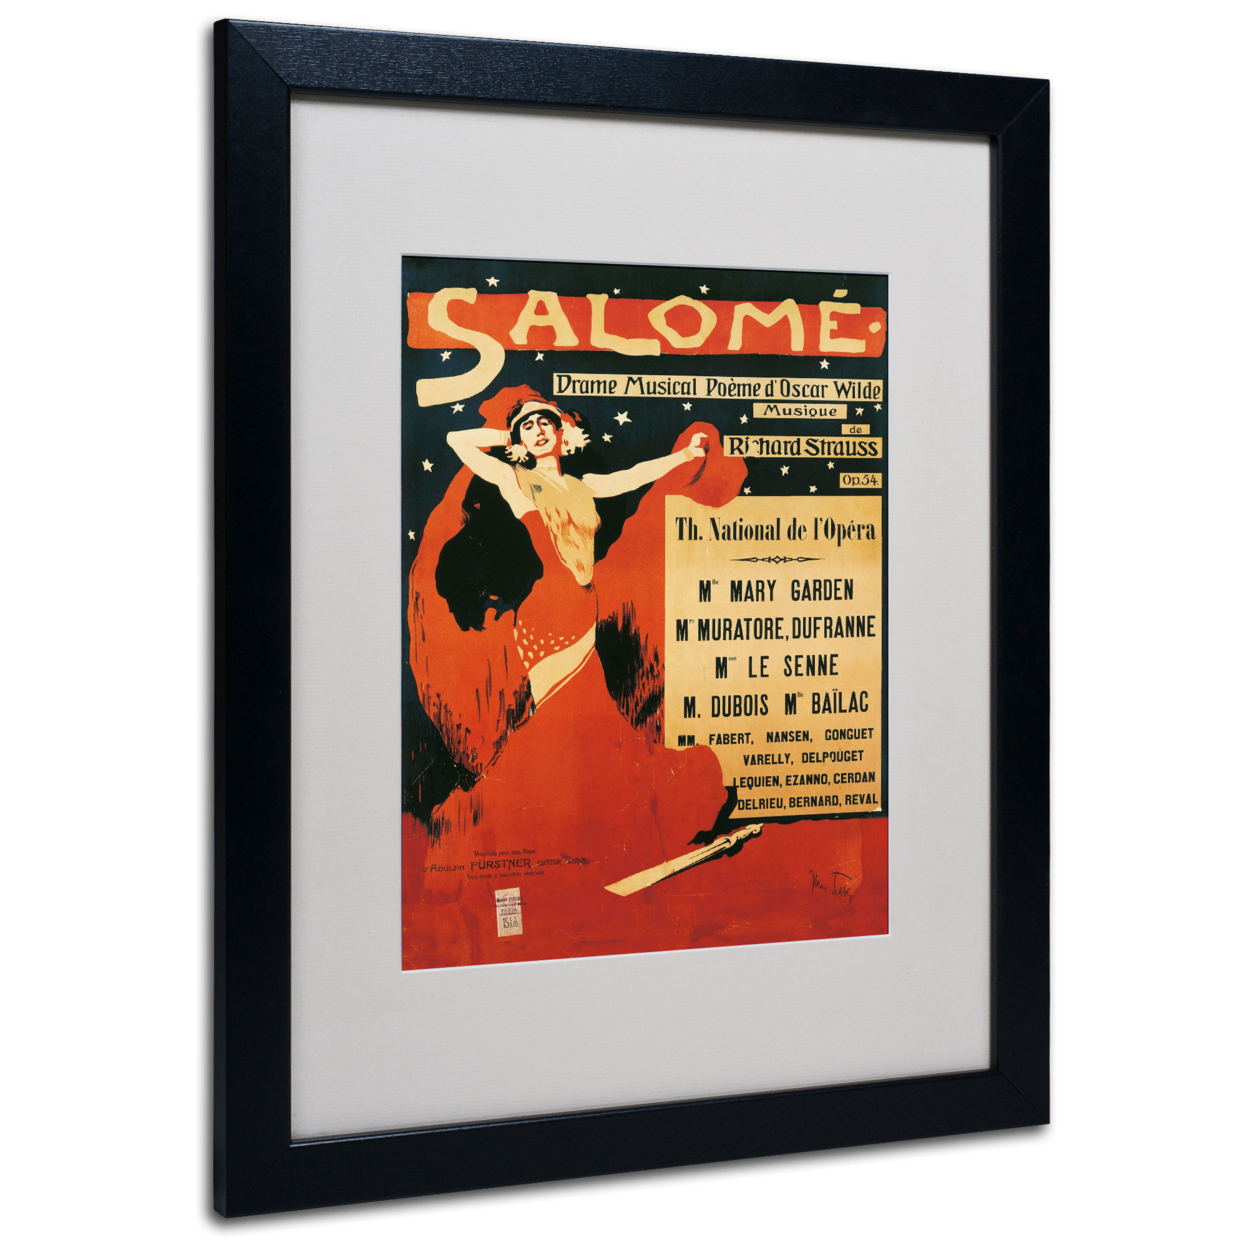 Richard Strauss 'Poster Of Opera Salome' Black Wooden Framed Art 18 X 22 Inches